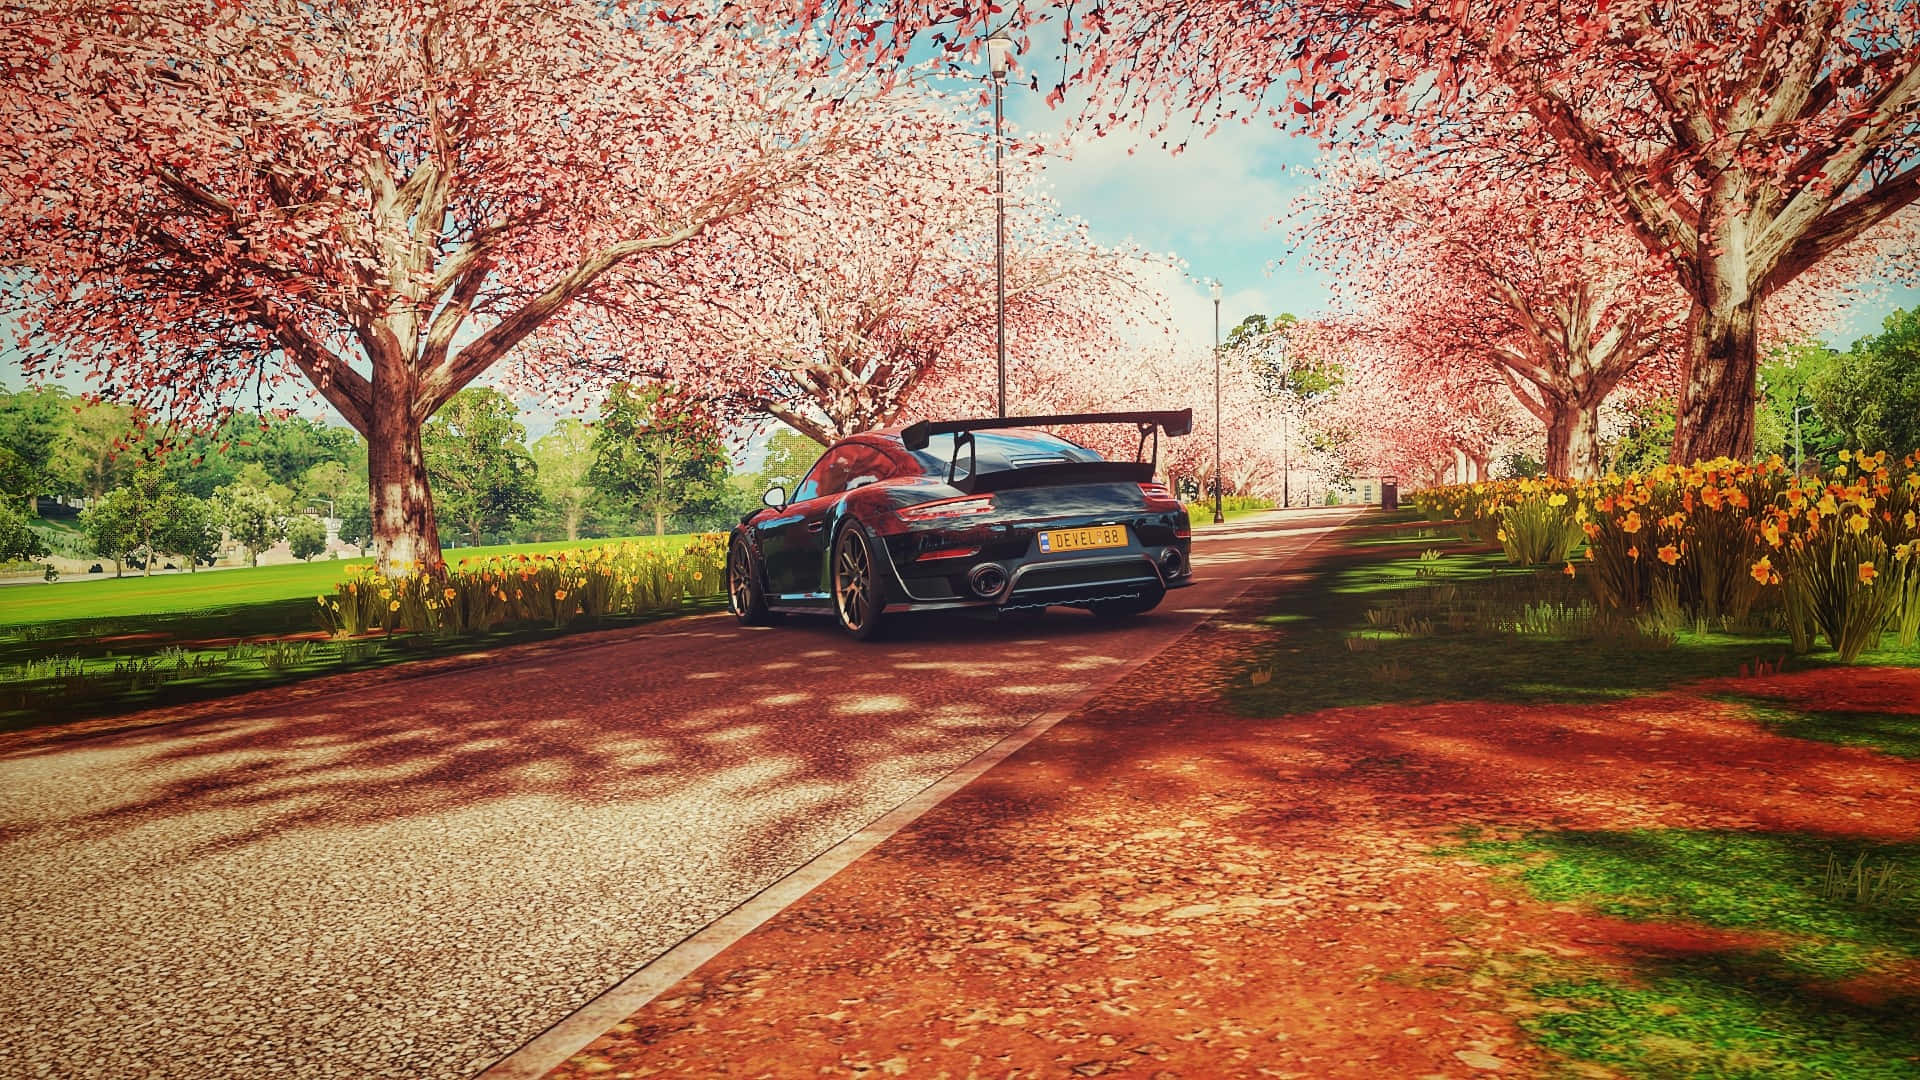 Take the wheels for a spin in a world of breathtaking visuals with Forza Horizon 4